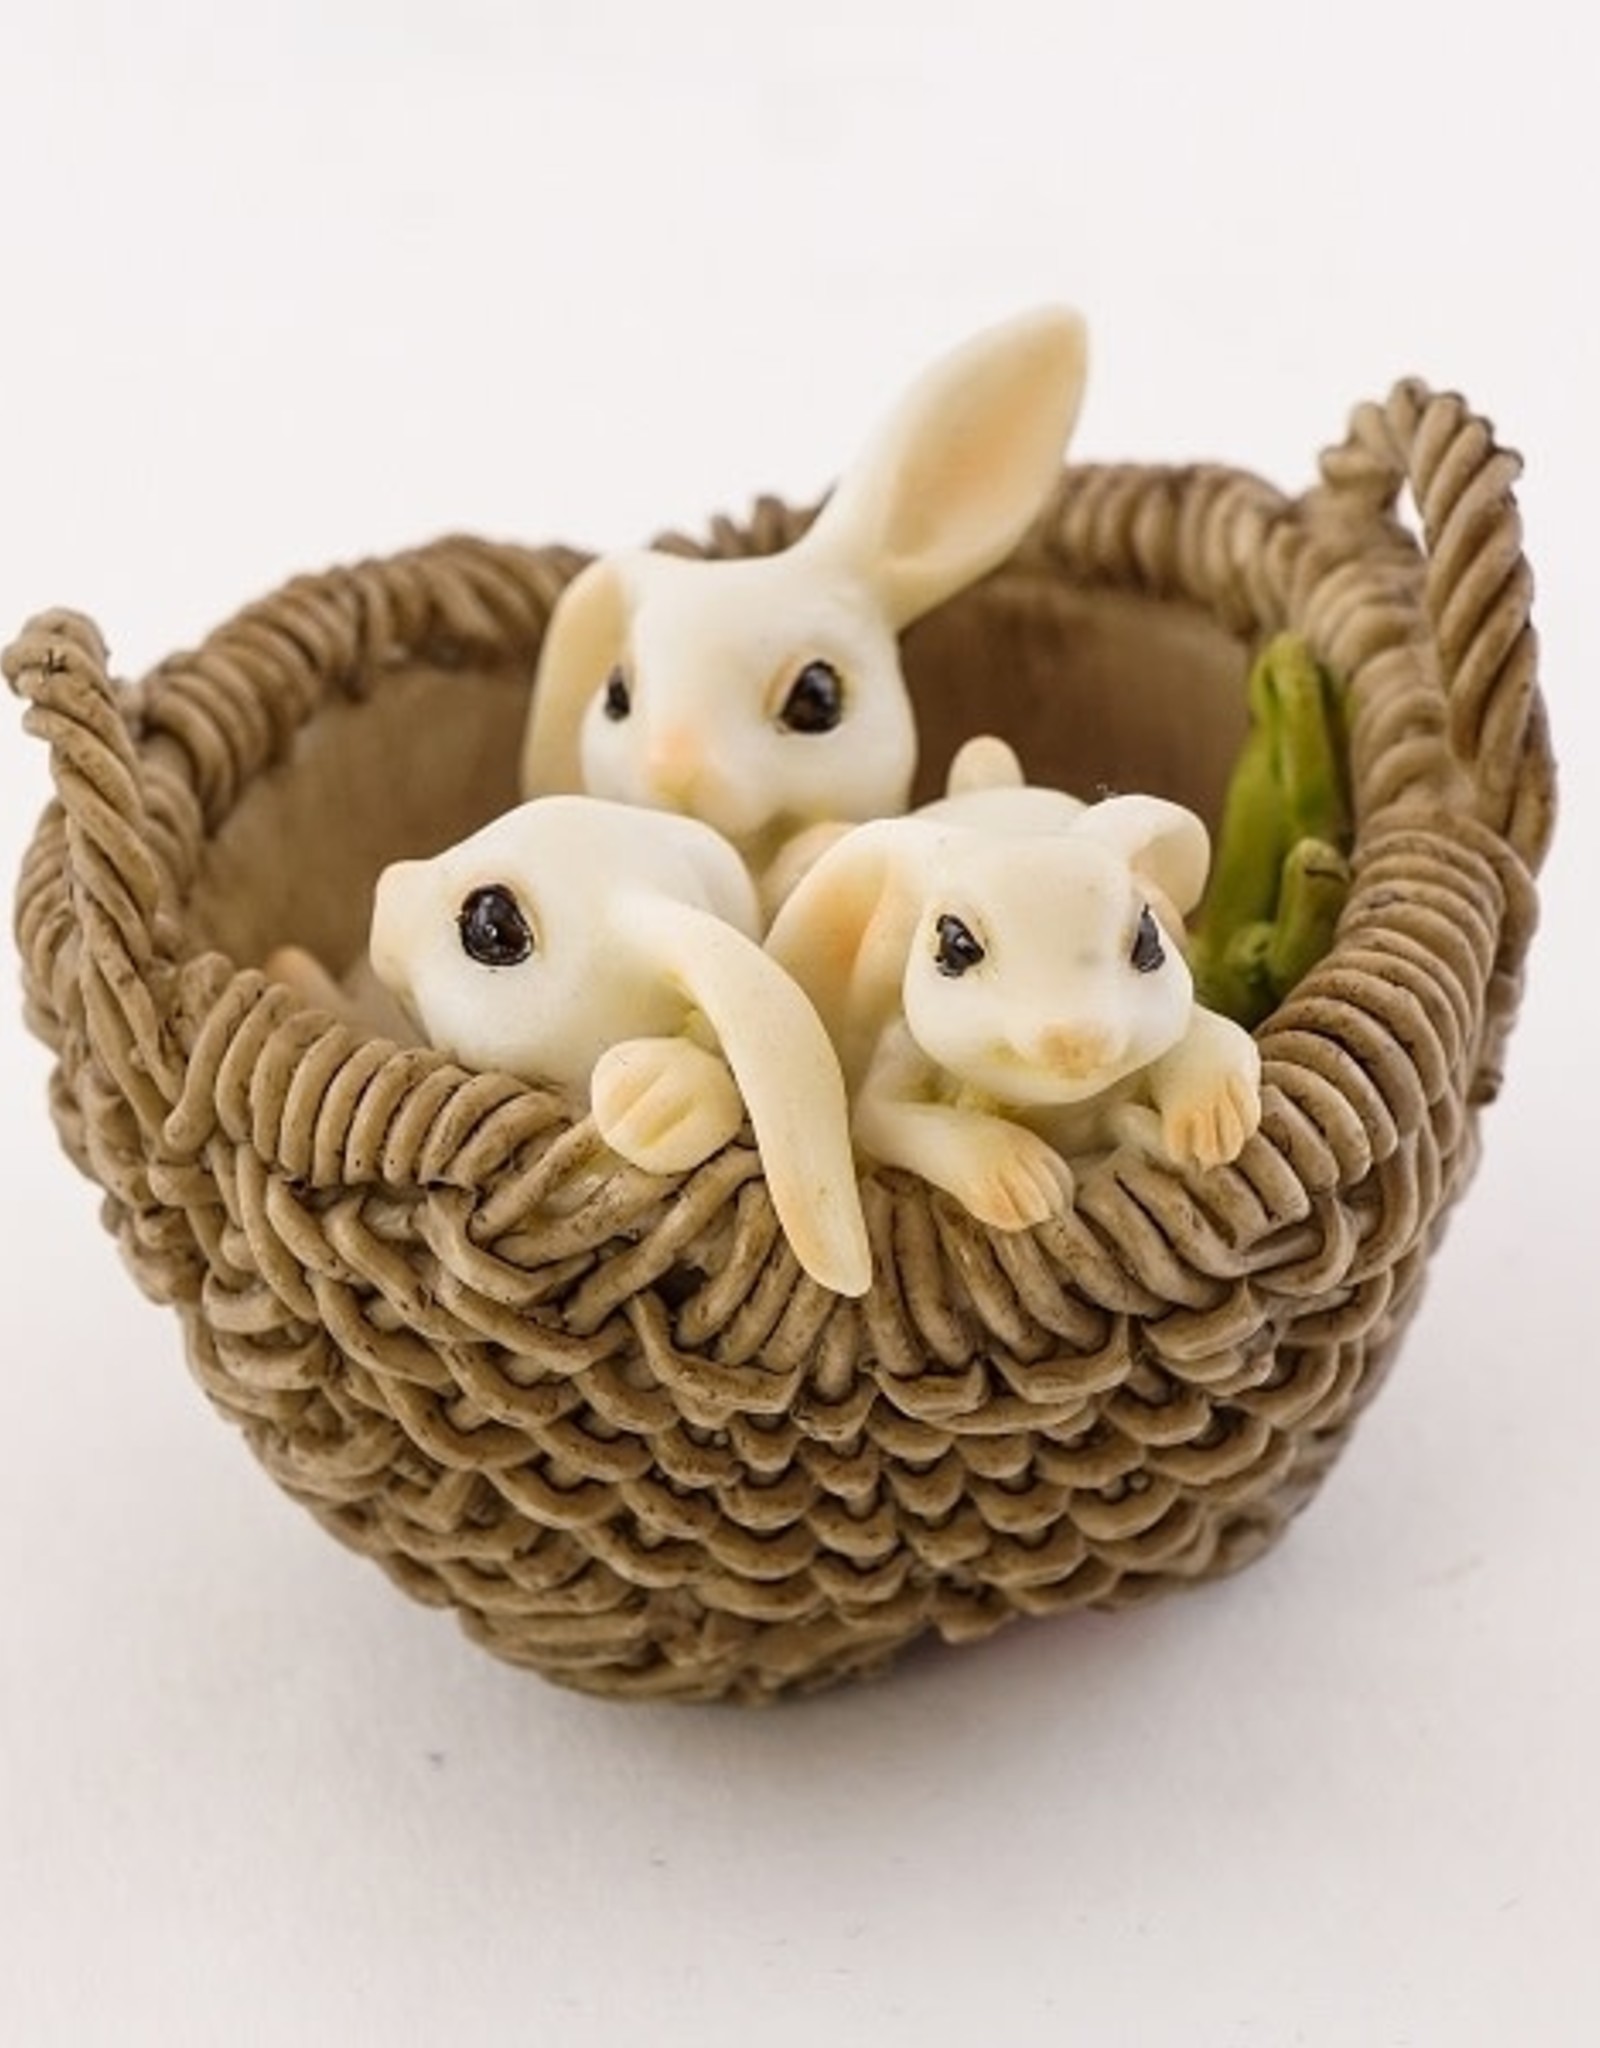 Top Land Trading BUNNIES IN BASKET W/ CARROT